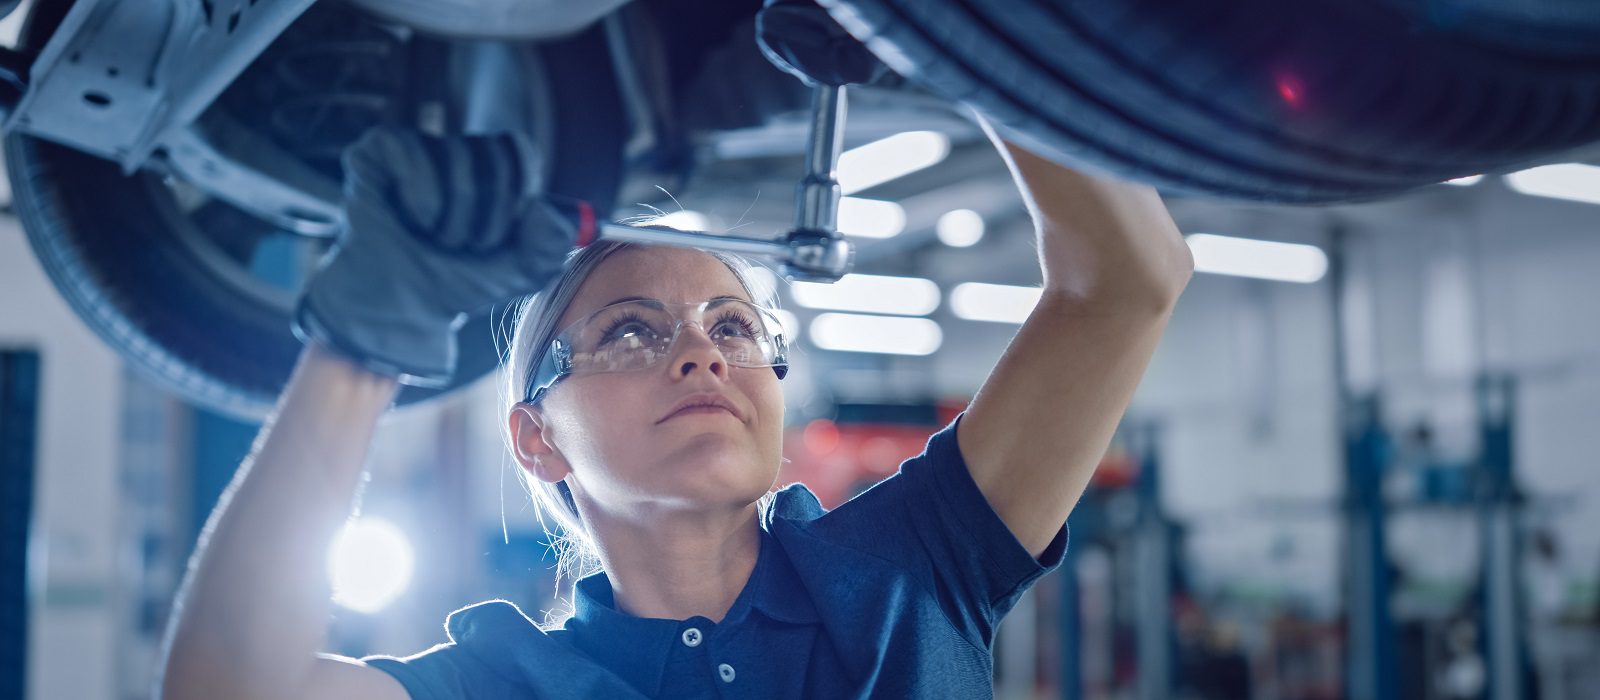 Portrait Shot of a Female Mechanic Working Under Vehicle in a Car Service. Empowering Woman Wearing Gloves and Using a Ratchet Underneath the Car. Modern Clean Workshop.